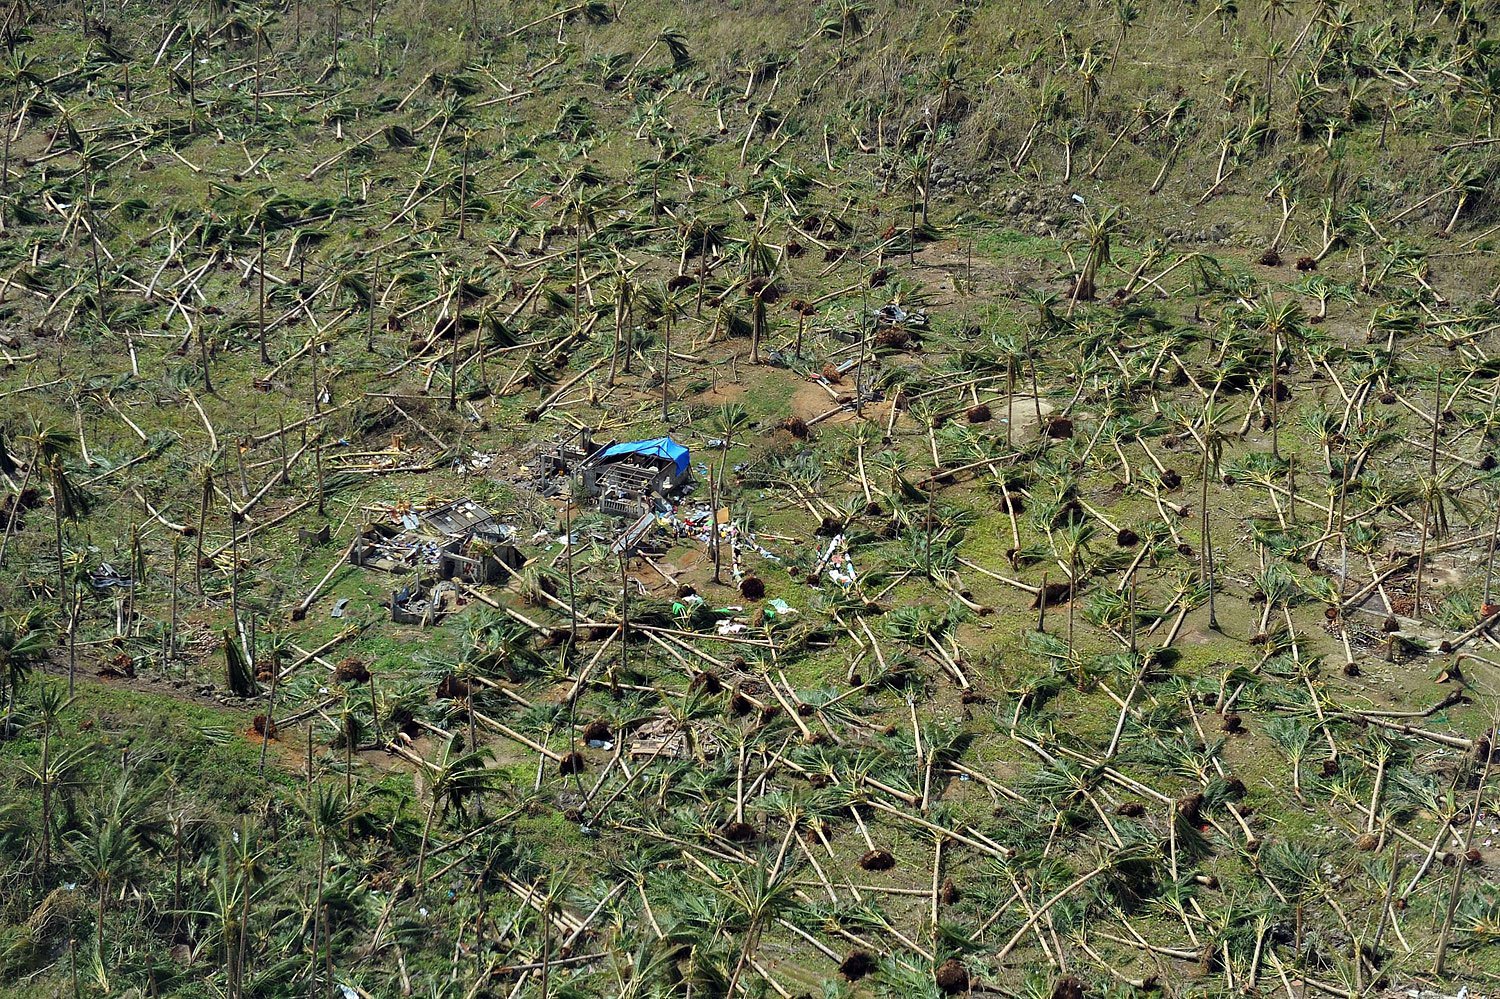 Aerial photo showing uprooted coconut trees on a hill near the town of Guiuan in Eastern Samar province in the central Philippines on November 11, 2013 only days after Super Typhoon Haiyan devastated the town on November 8.